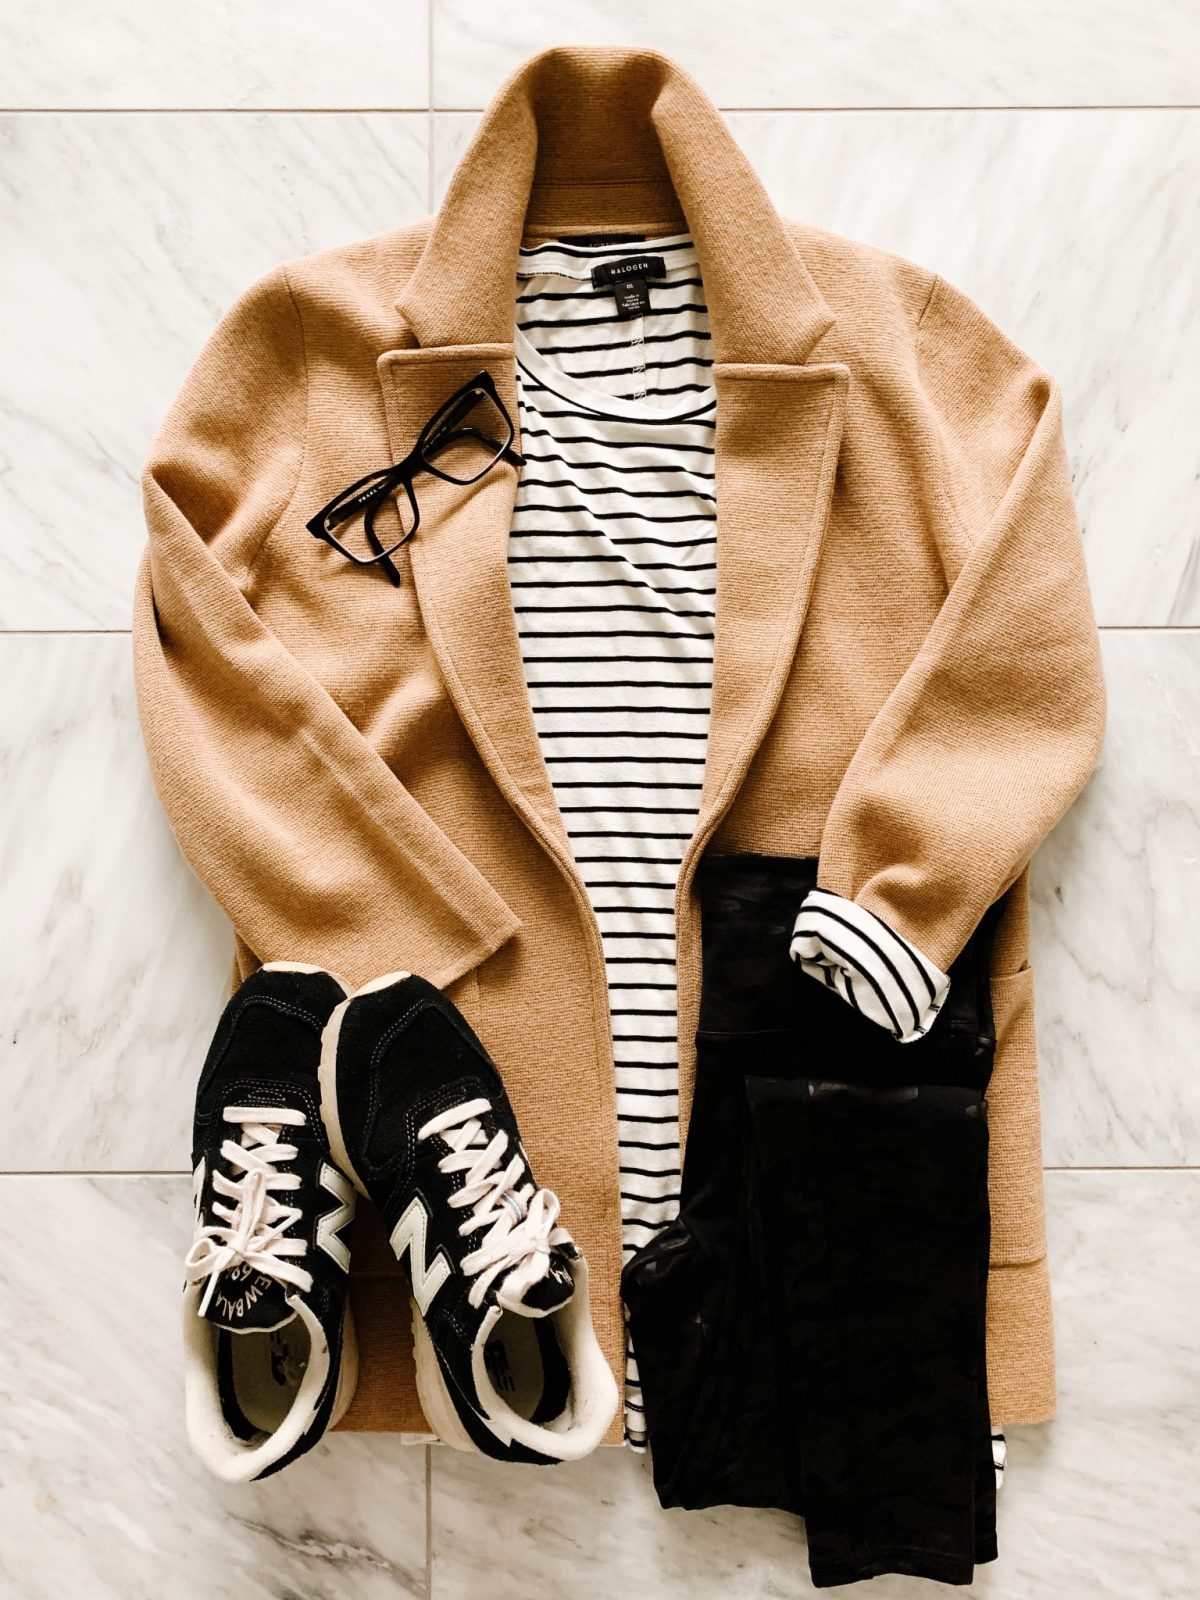 A J. Crew sweater blazer, striped tee, black pants and New Balance sneakers